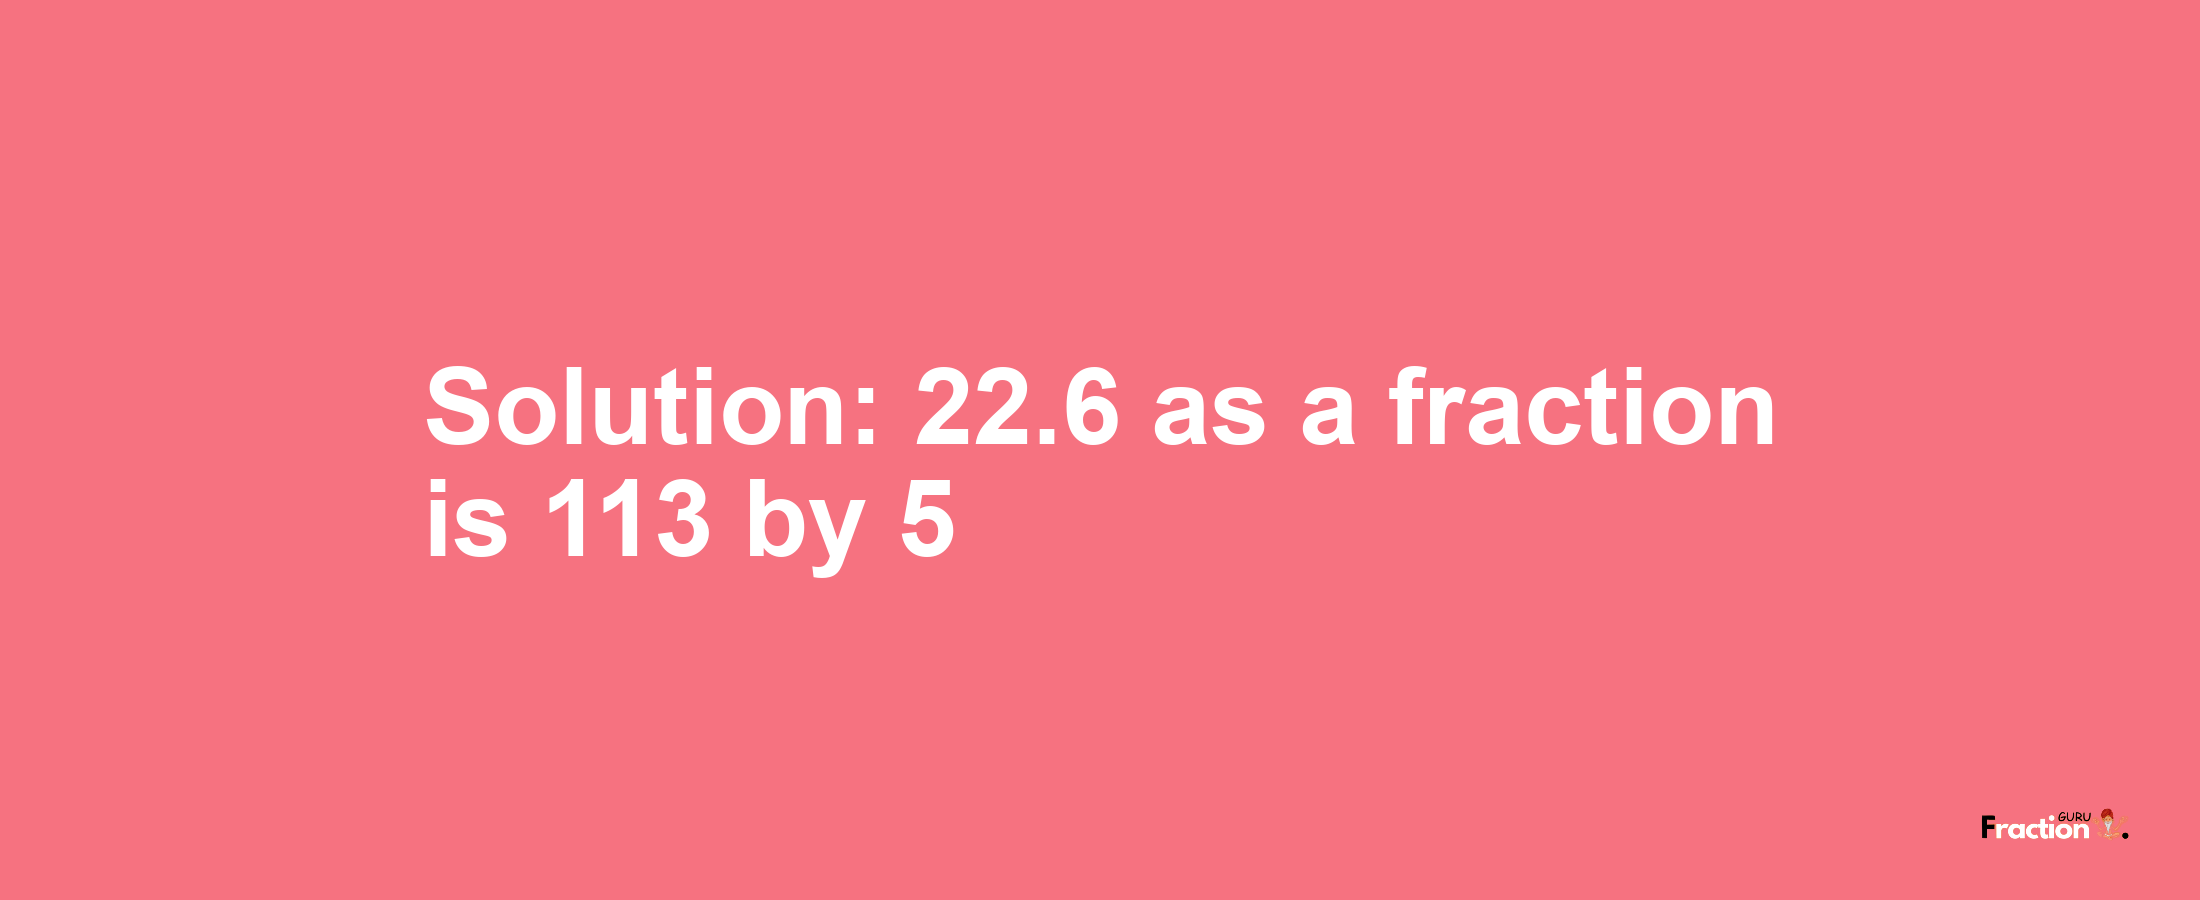 Solution:22.6 as a fraction is 113/5